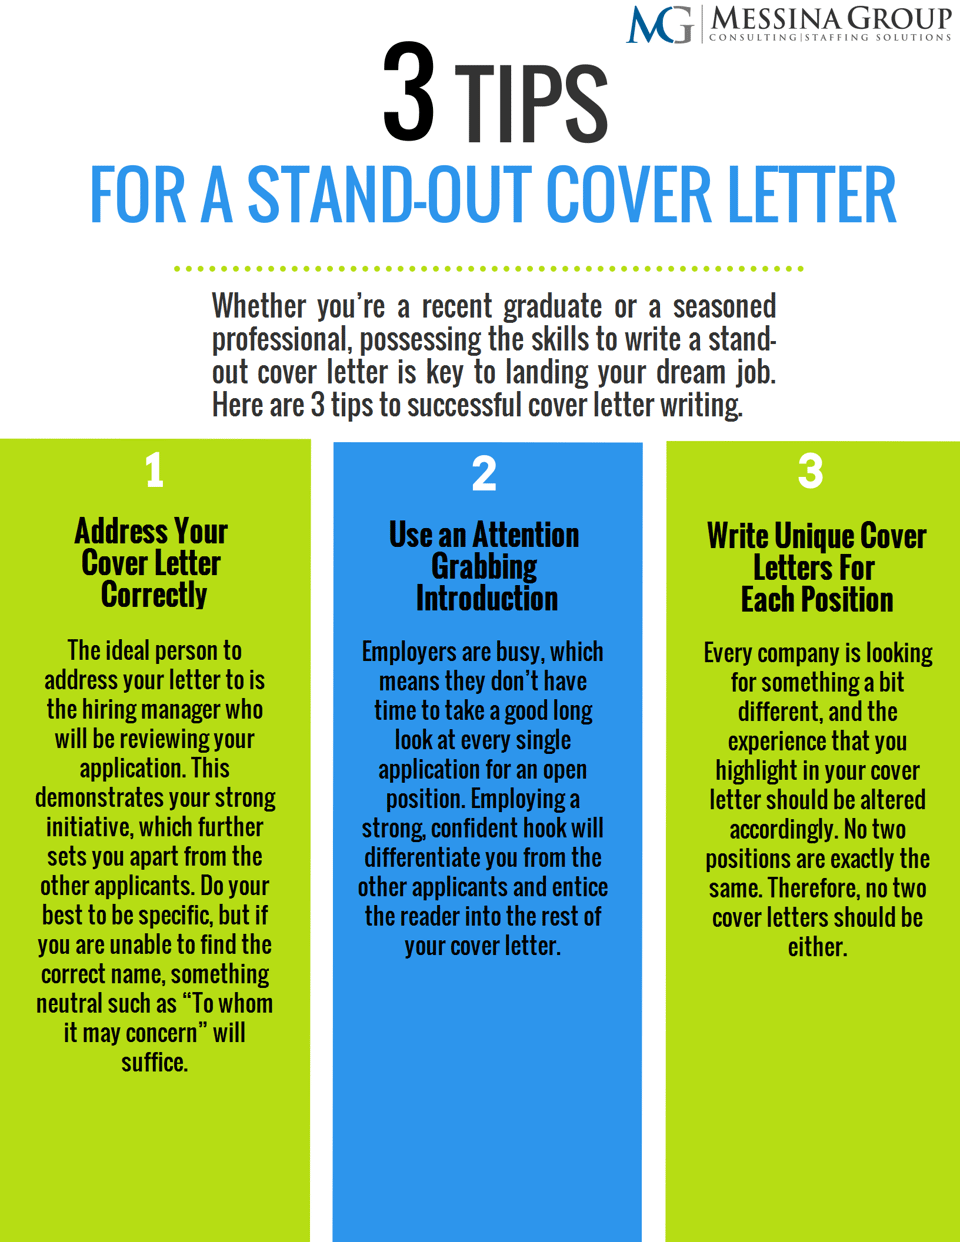 what makes a cover letter stand out from the crowd